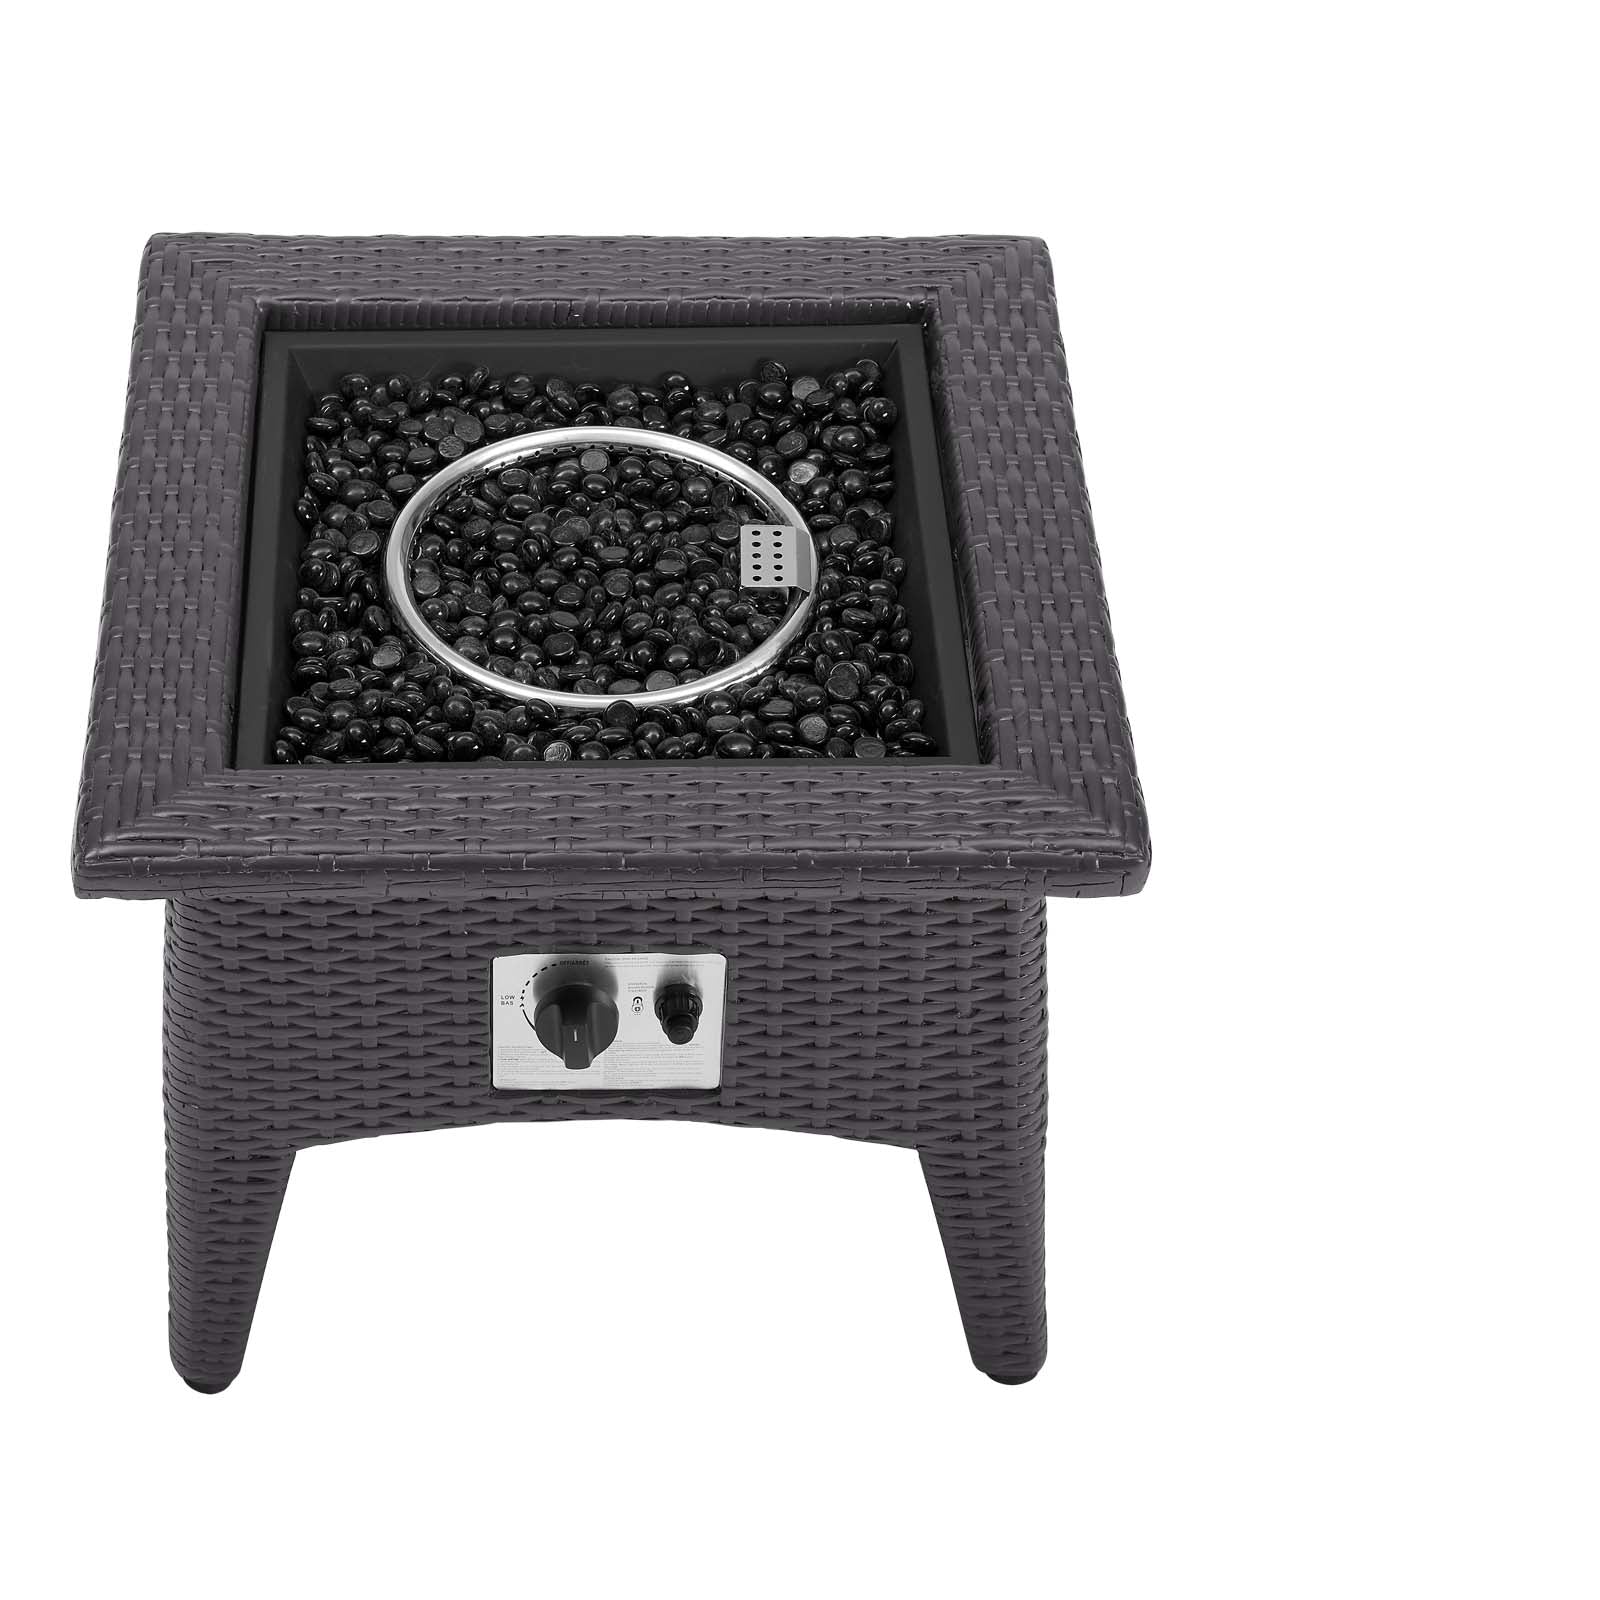 Vivacity Outdoor Patio Fire Pit Table - East Shore Modern Home Furnishings